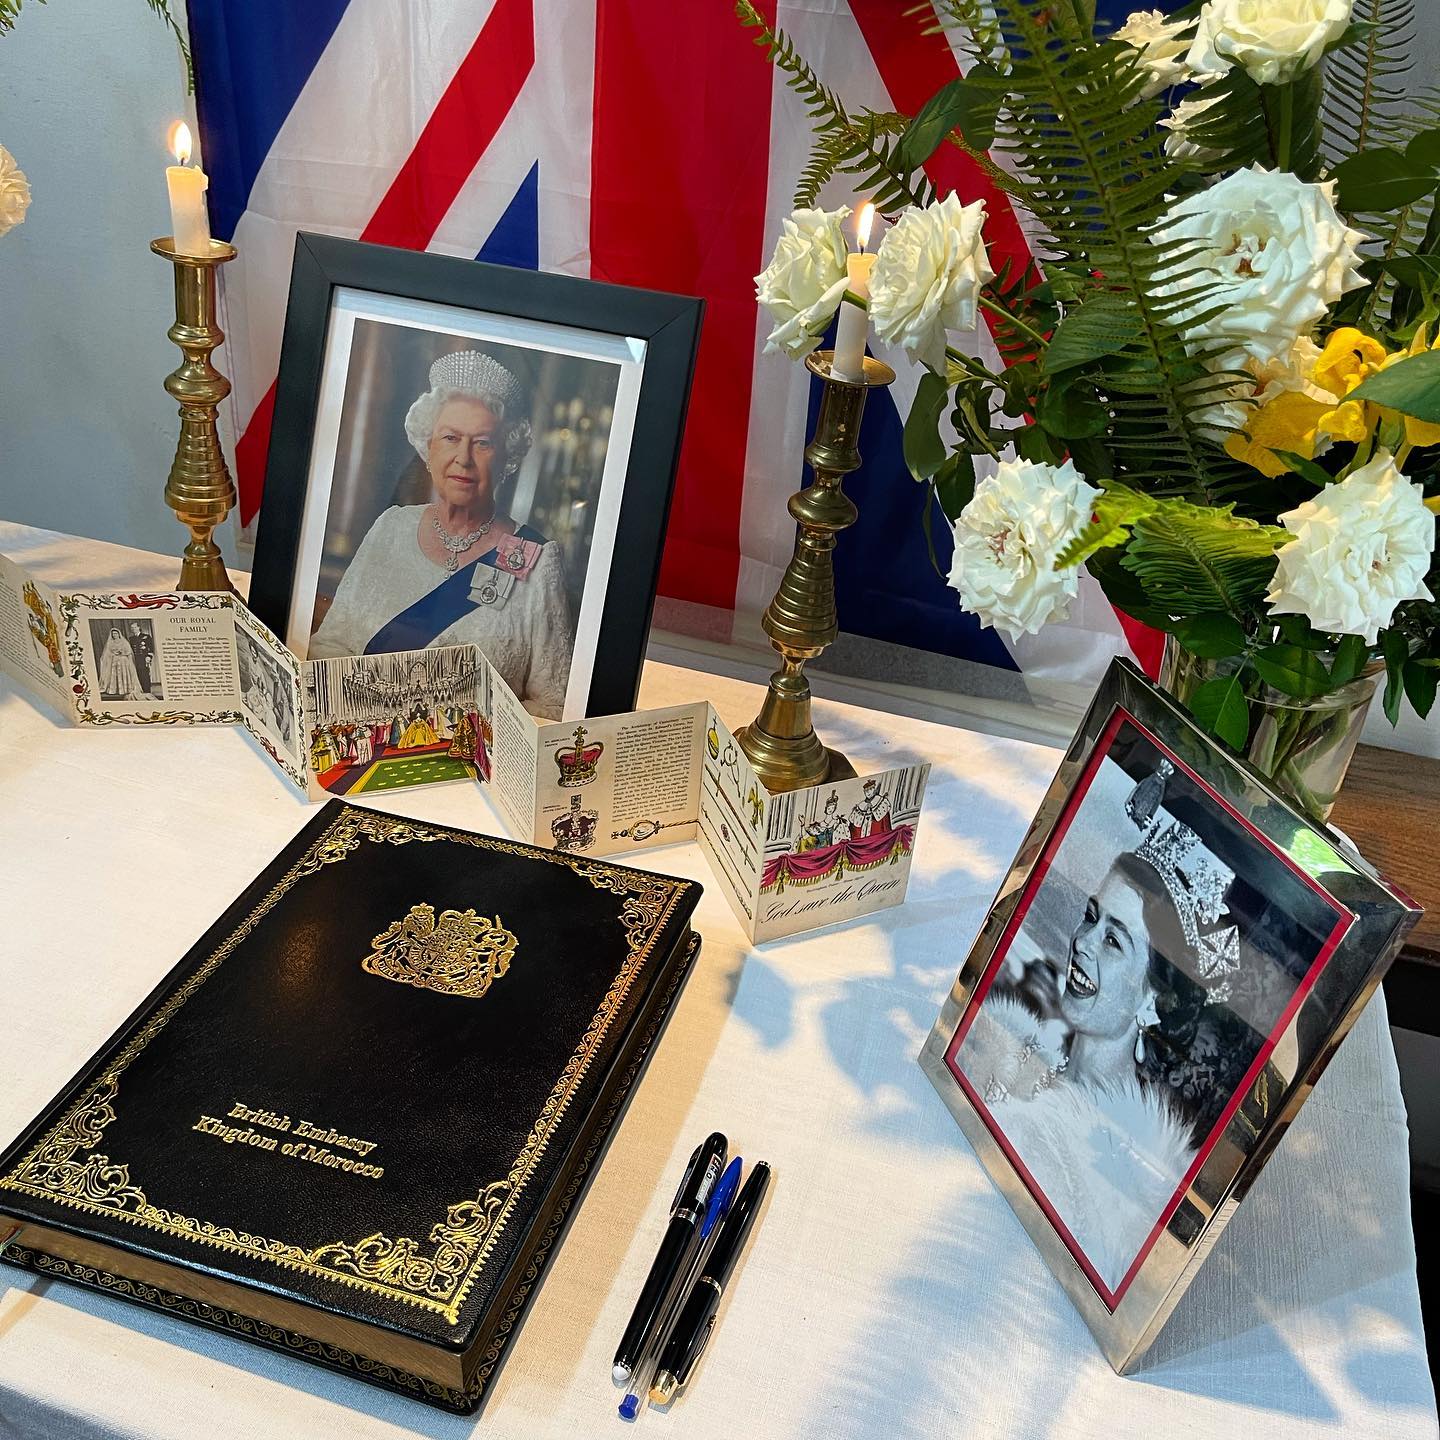 A memorial display for the death of the queen.